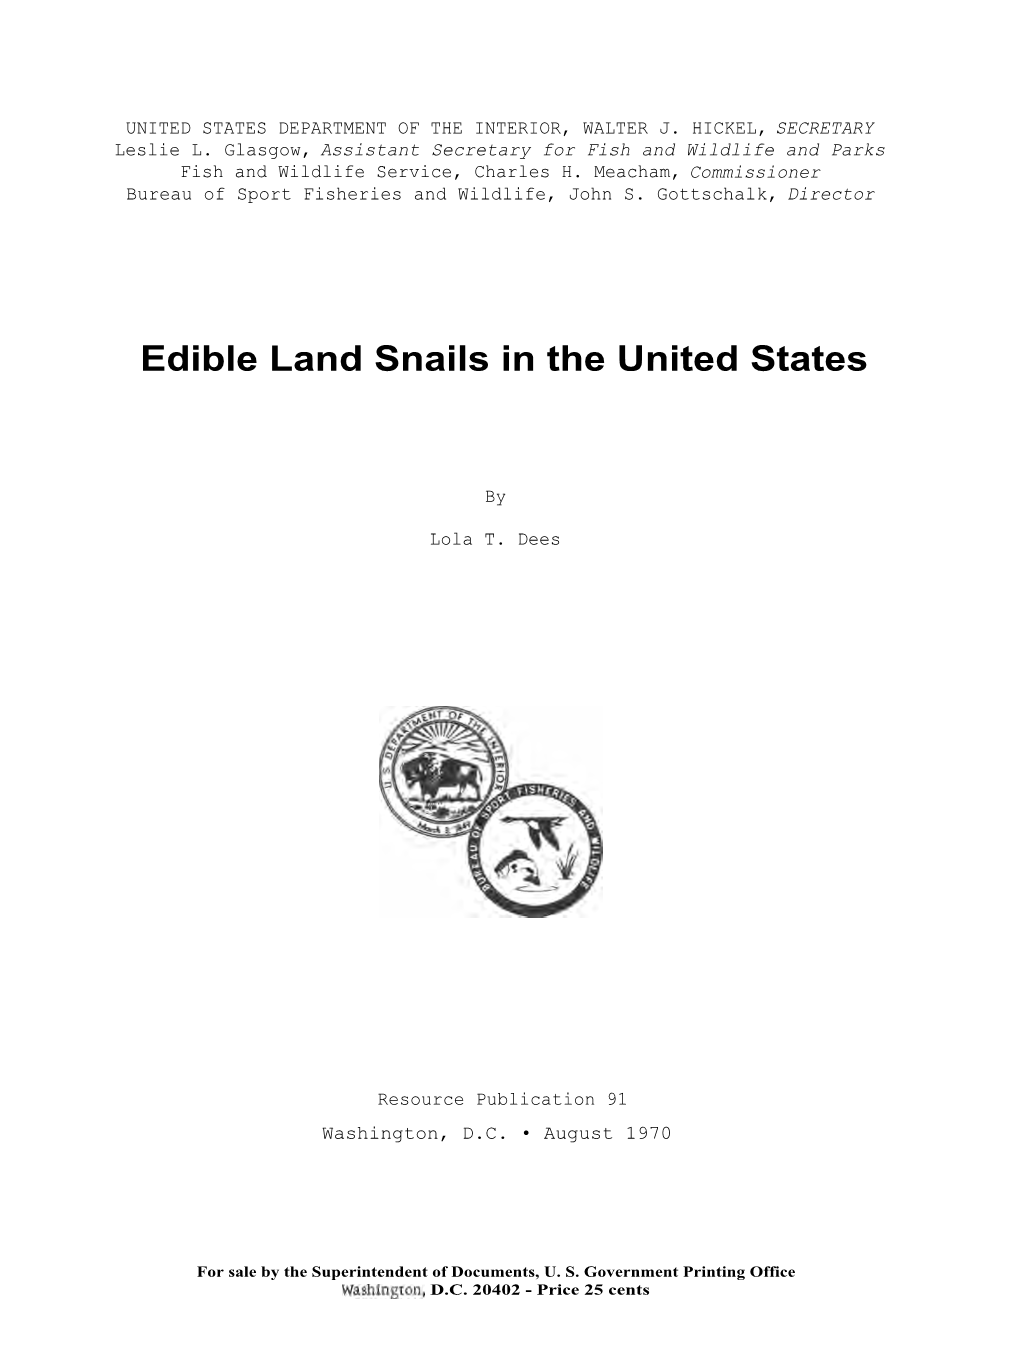 Edible Land Snails in the United States